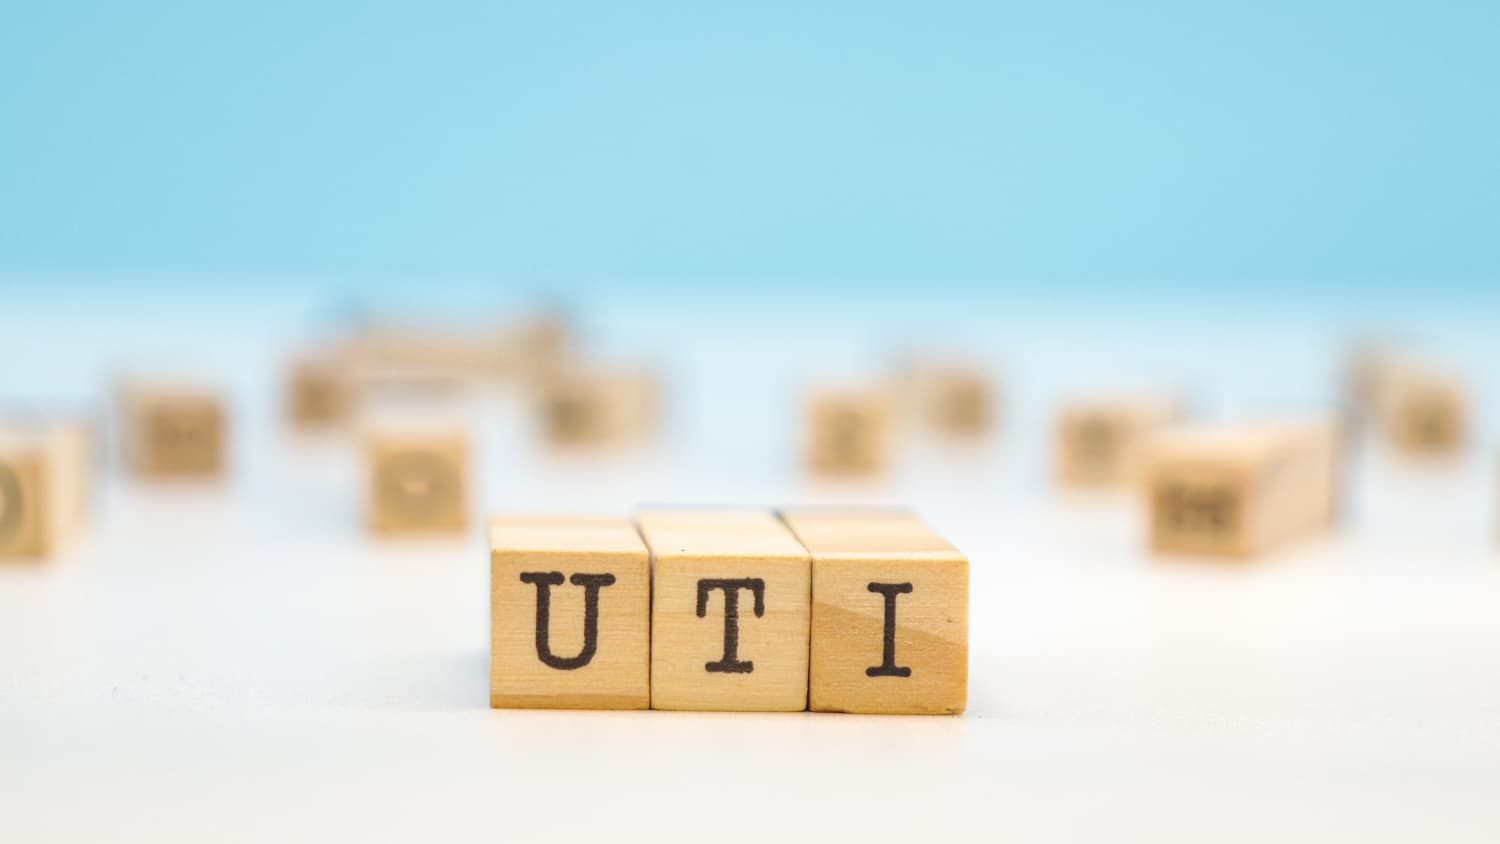 block letters spelling UTI for urinary tract infection